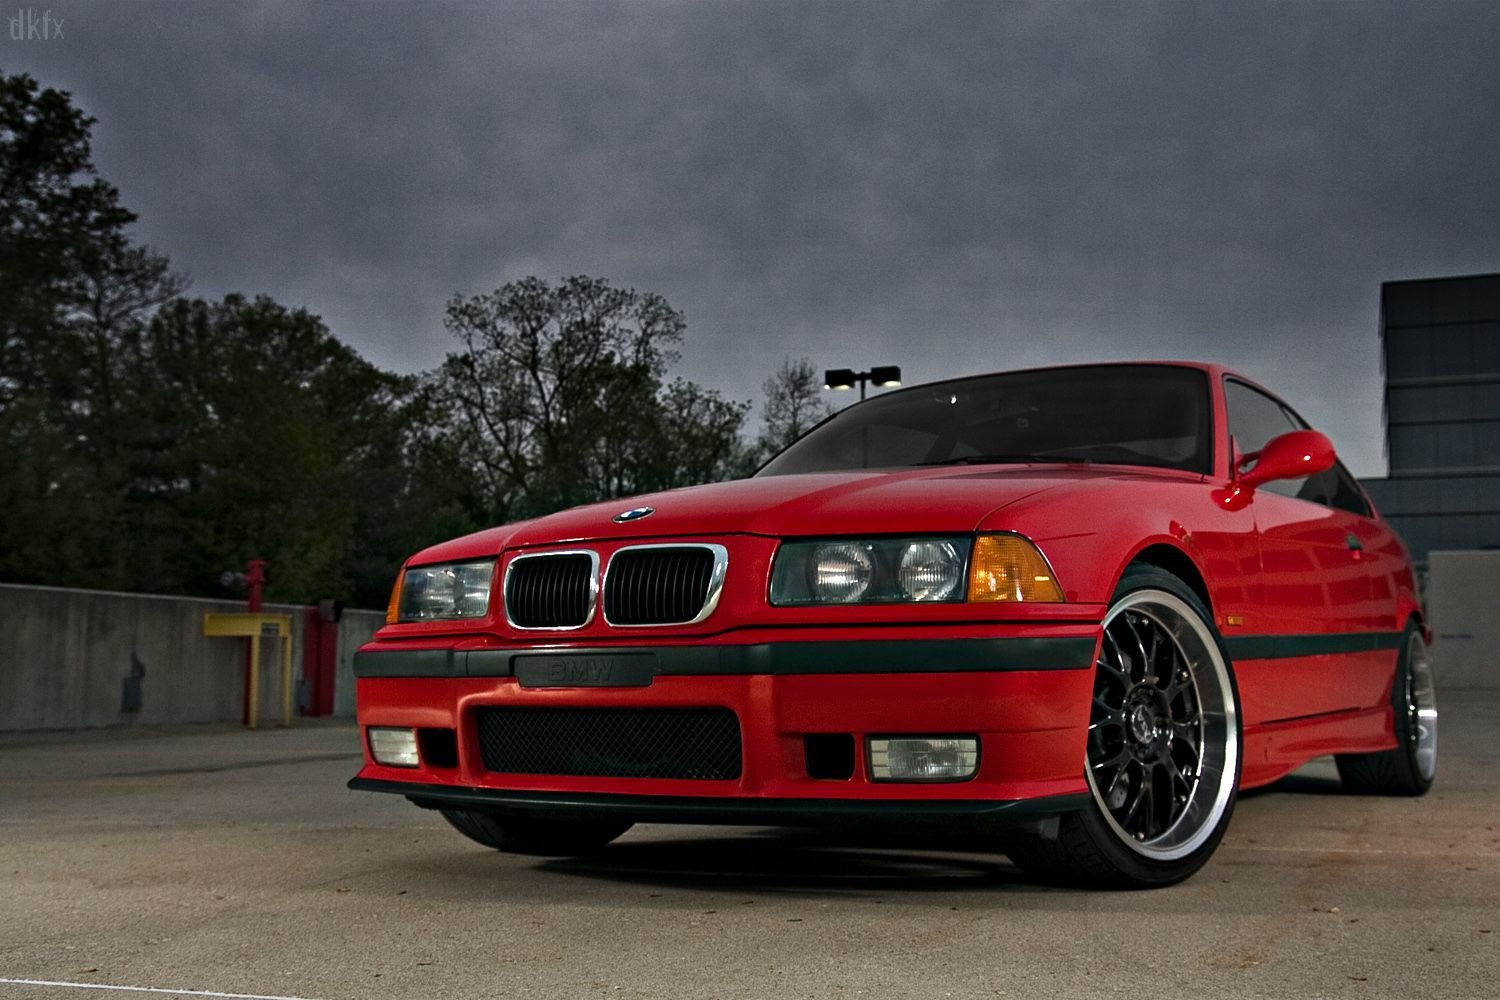 Chrome Grille Overlay on Red BMW 3-Series - Photo by dan kinzie